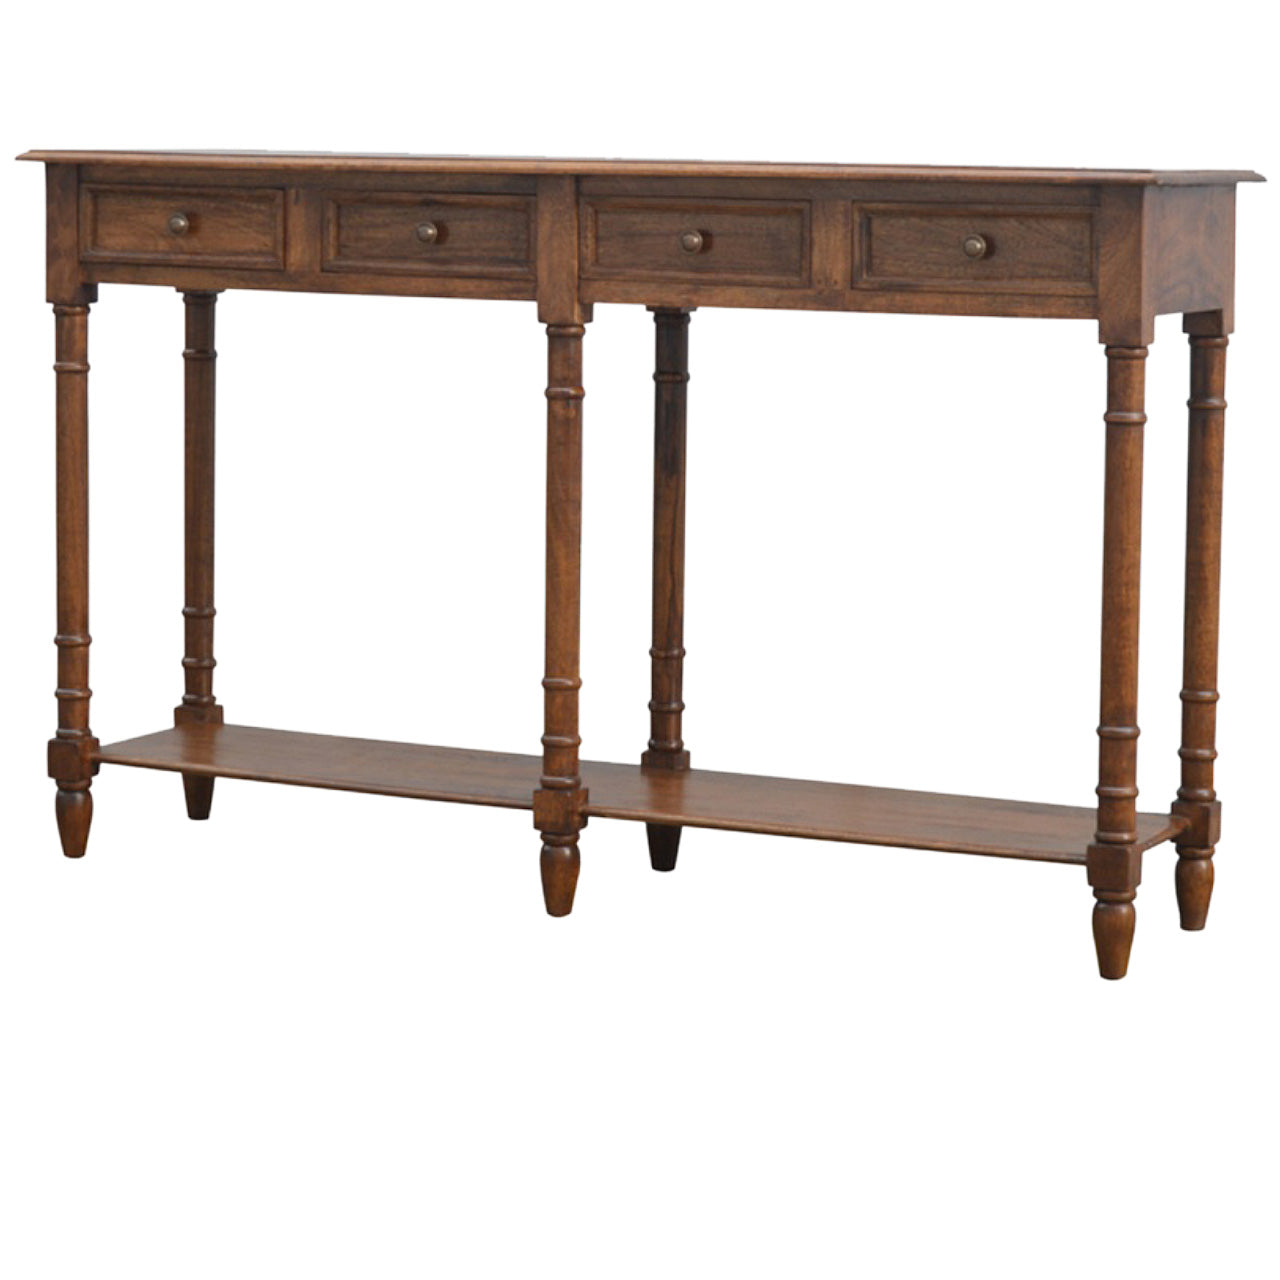 View 4 Drawer Hallway Console Table information